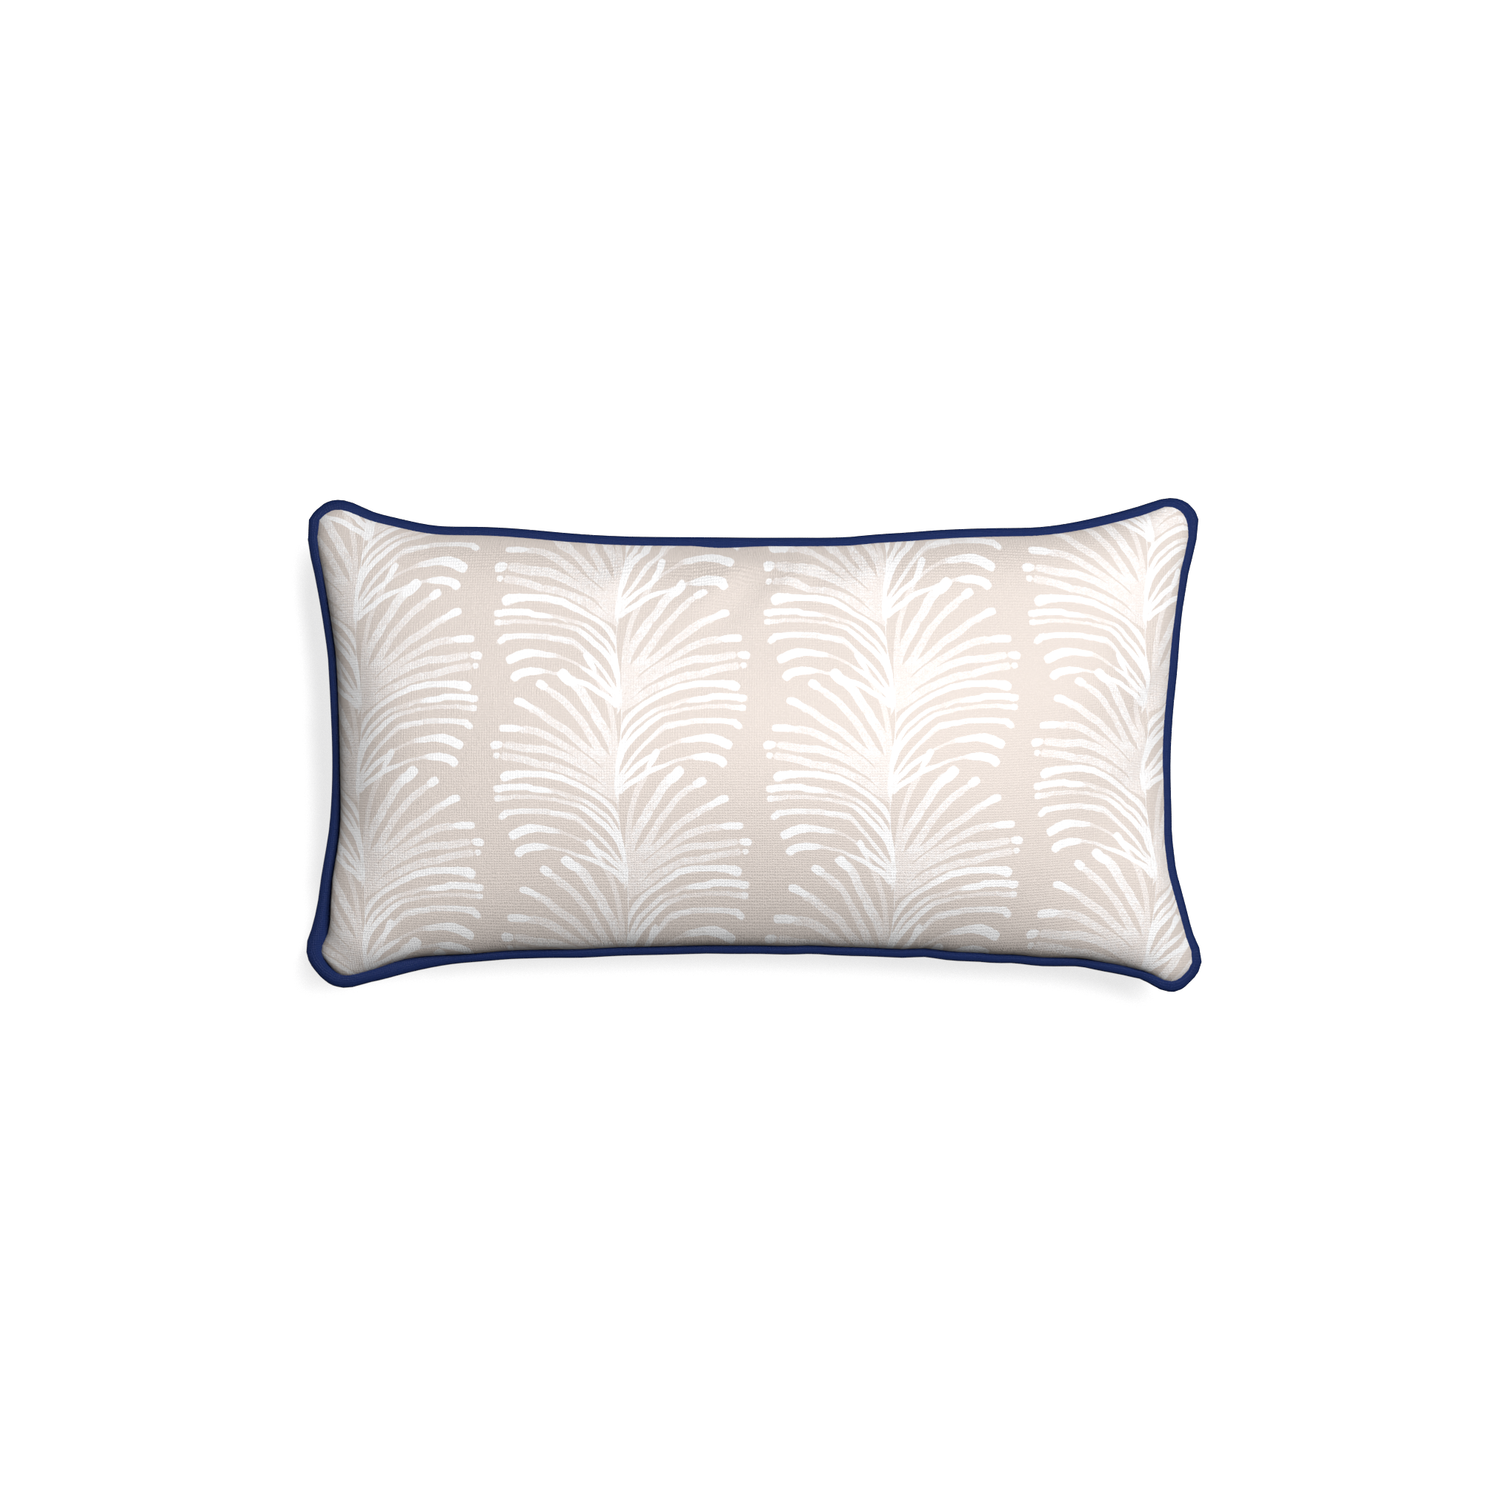 Petite-lumbar emma sand custom sand colored botanical stripepillow with midnight piping on white background